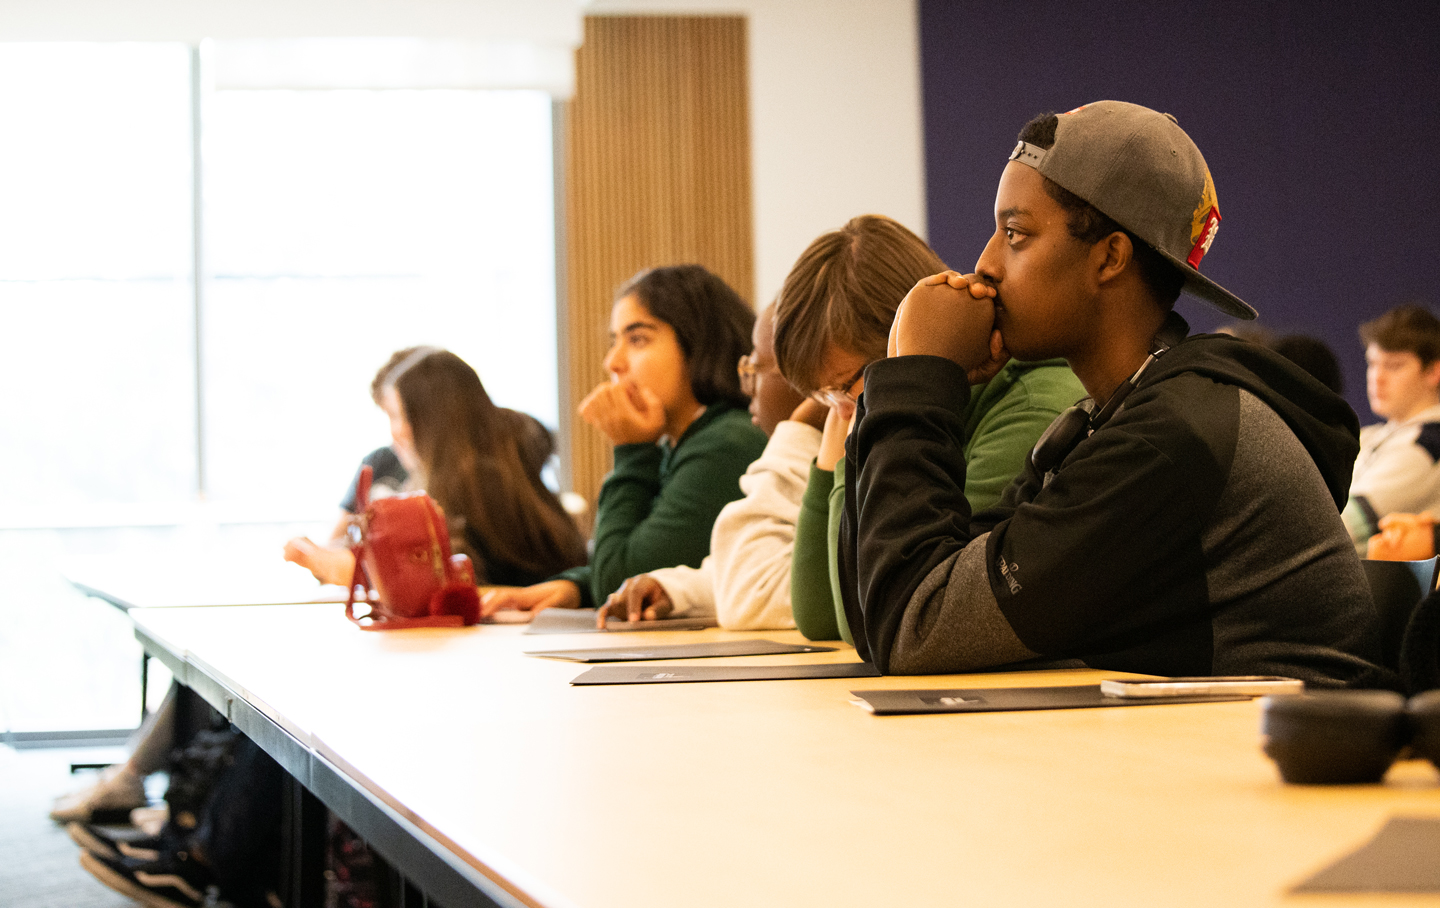 A student watches a presentation.